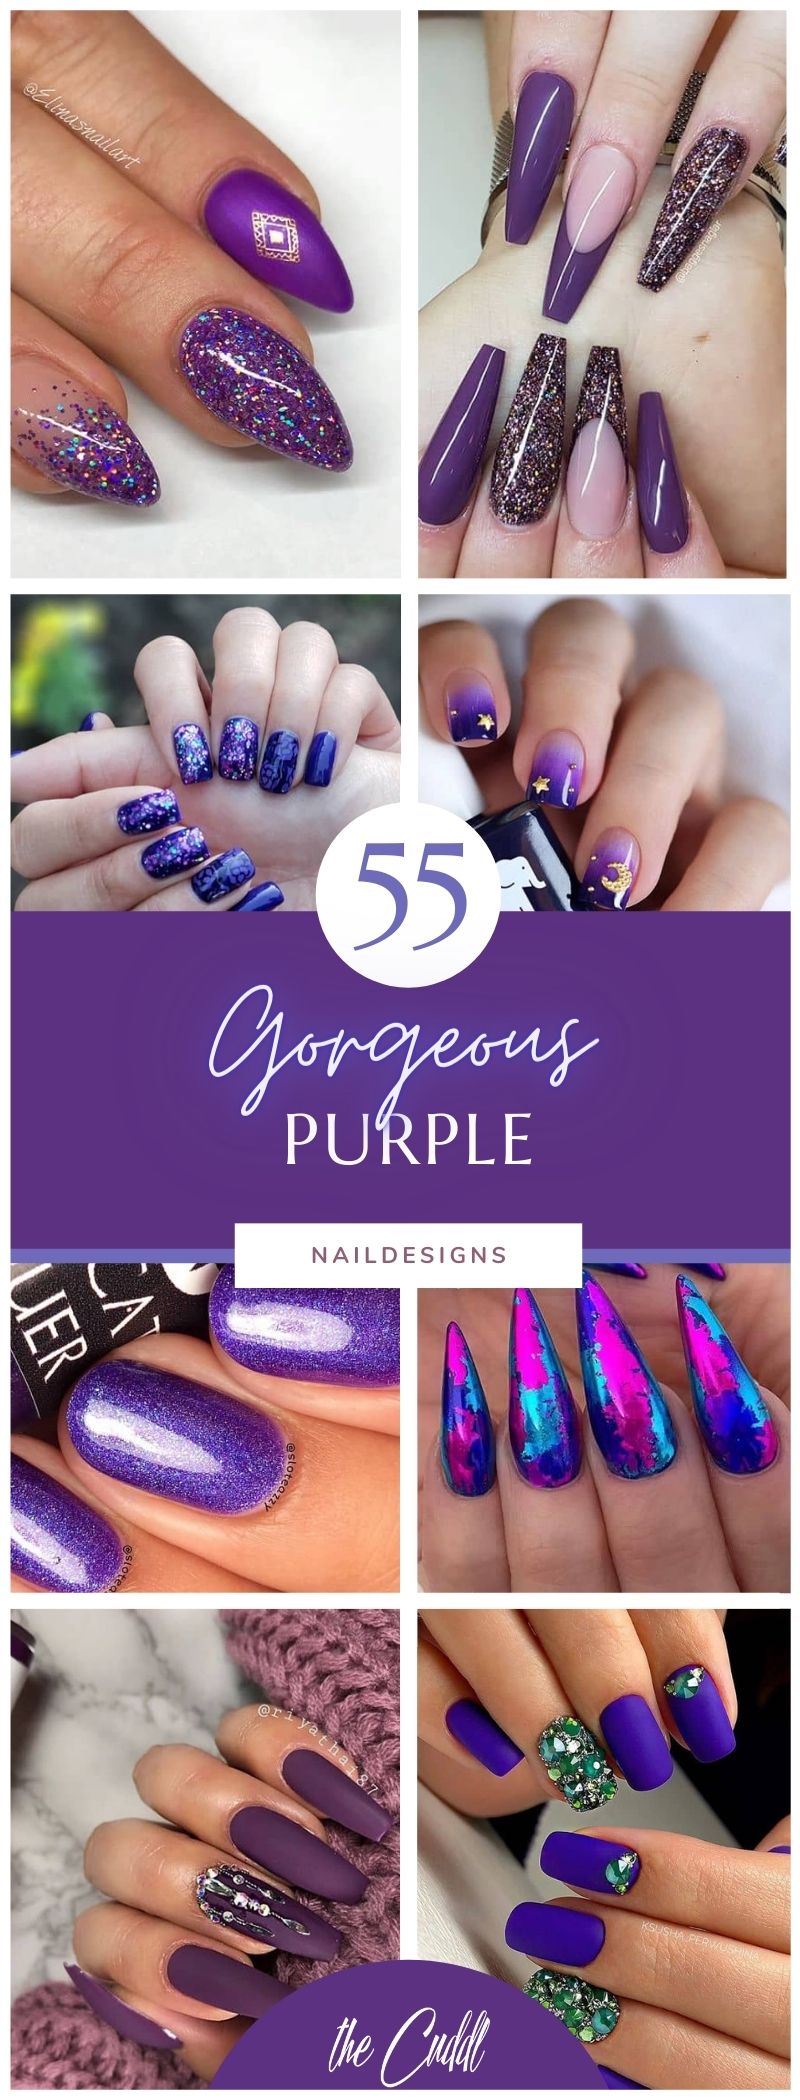 50 Perfect Purple Nail Designs for Practically any Occasion